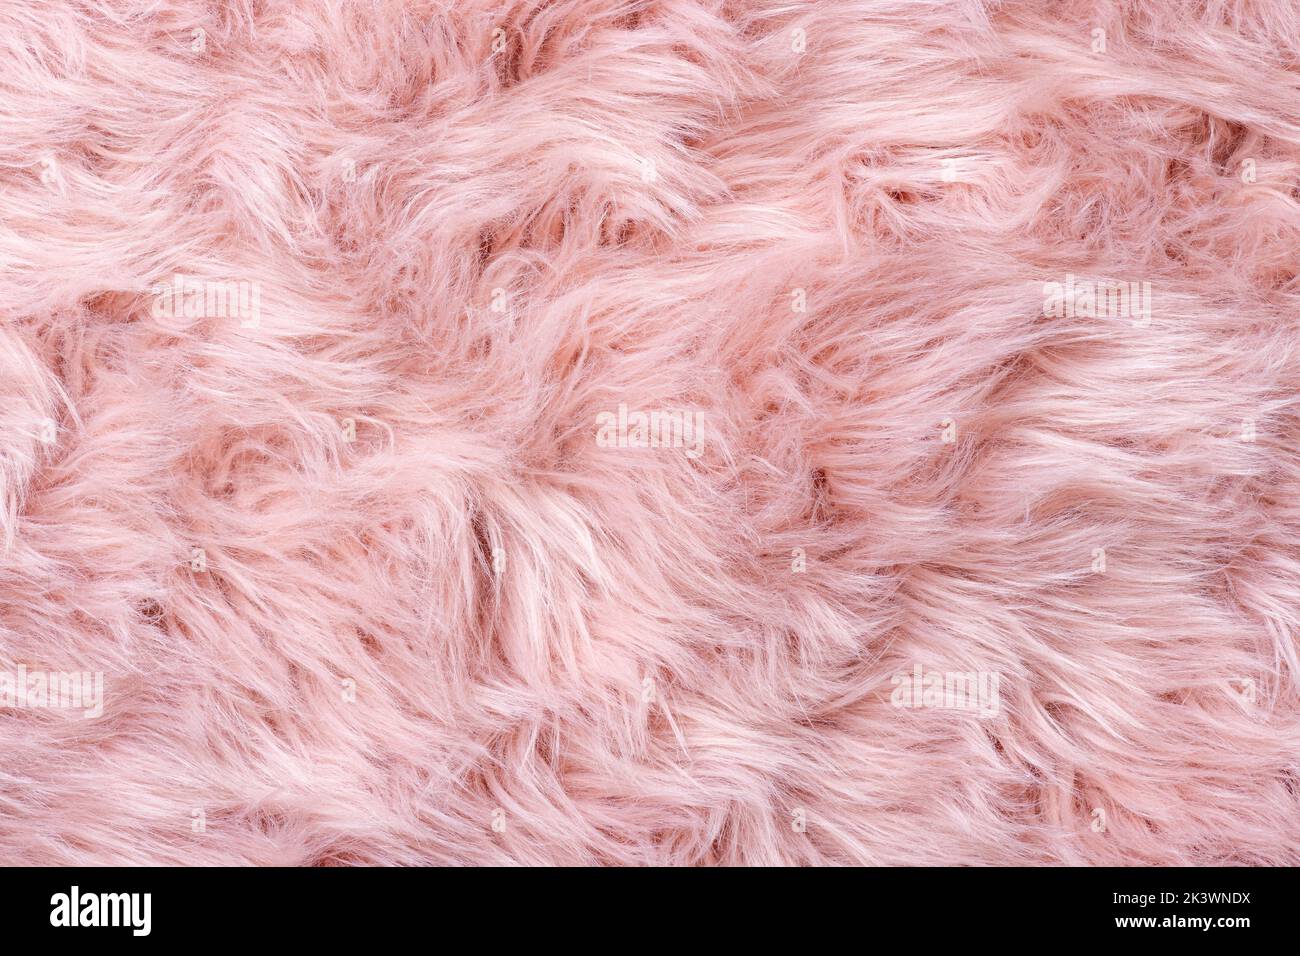 39,351 Pink Fur Texture Background Images, Stock Photos, 3D objects, &  Vectors